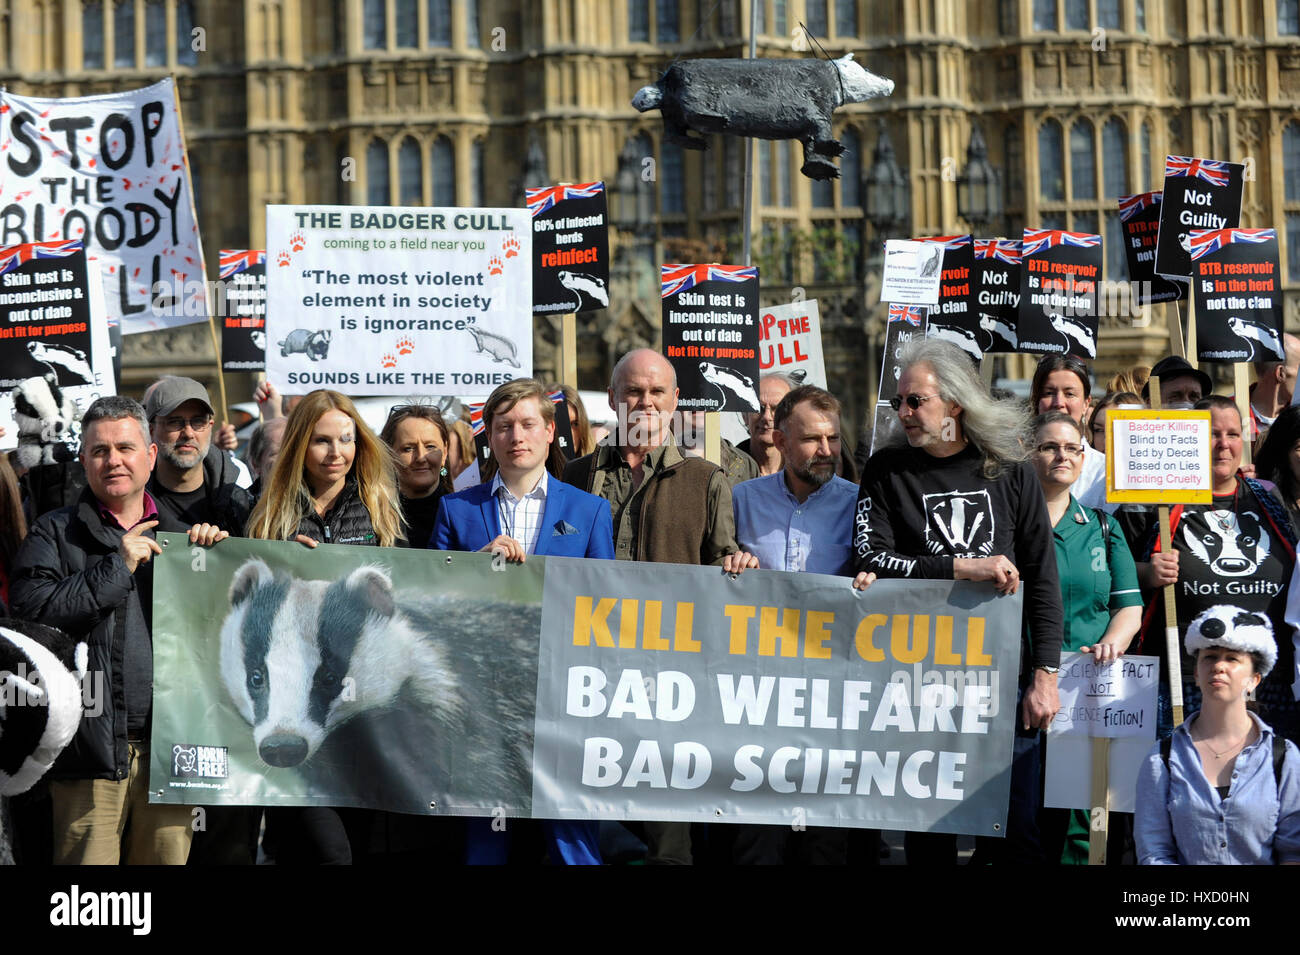 London, UK. 27th Mar, 2017. (3rd left) TV presenter Anneka Svenska and (C) BBC wildlife presenter Simon King joins animal activists taking part in a Save the Badger rally outside Parliament. Mr King will be giving a presentation to MPs who are due to debate the culling of badgers in the House of Commons today. Credit: Stephen Chung/Alamy Live News Stock Photo